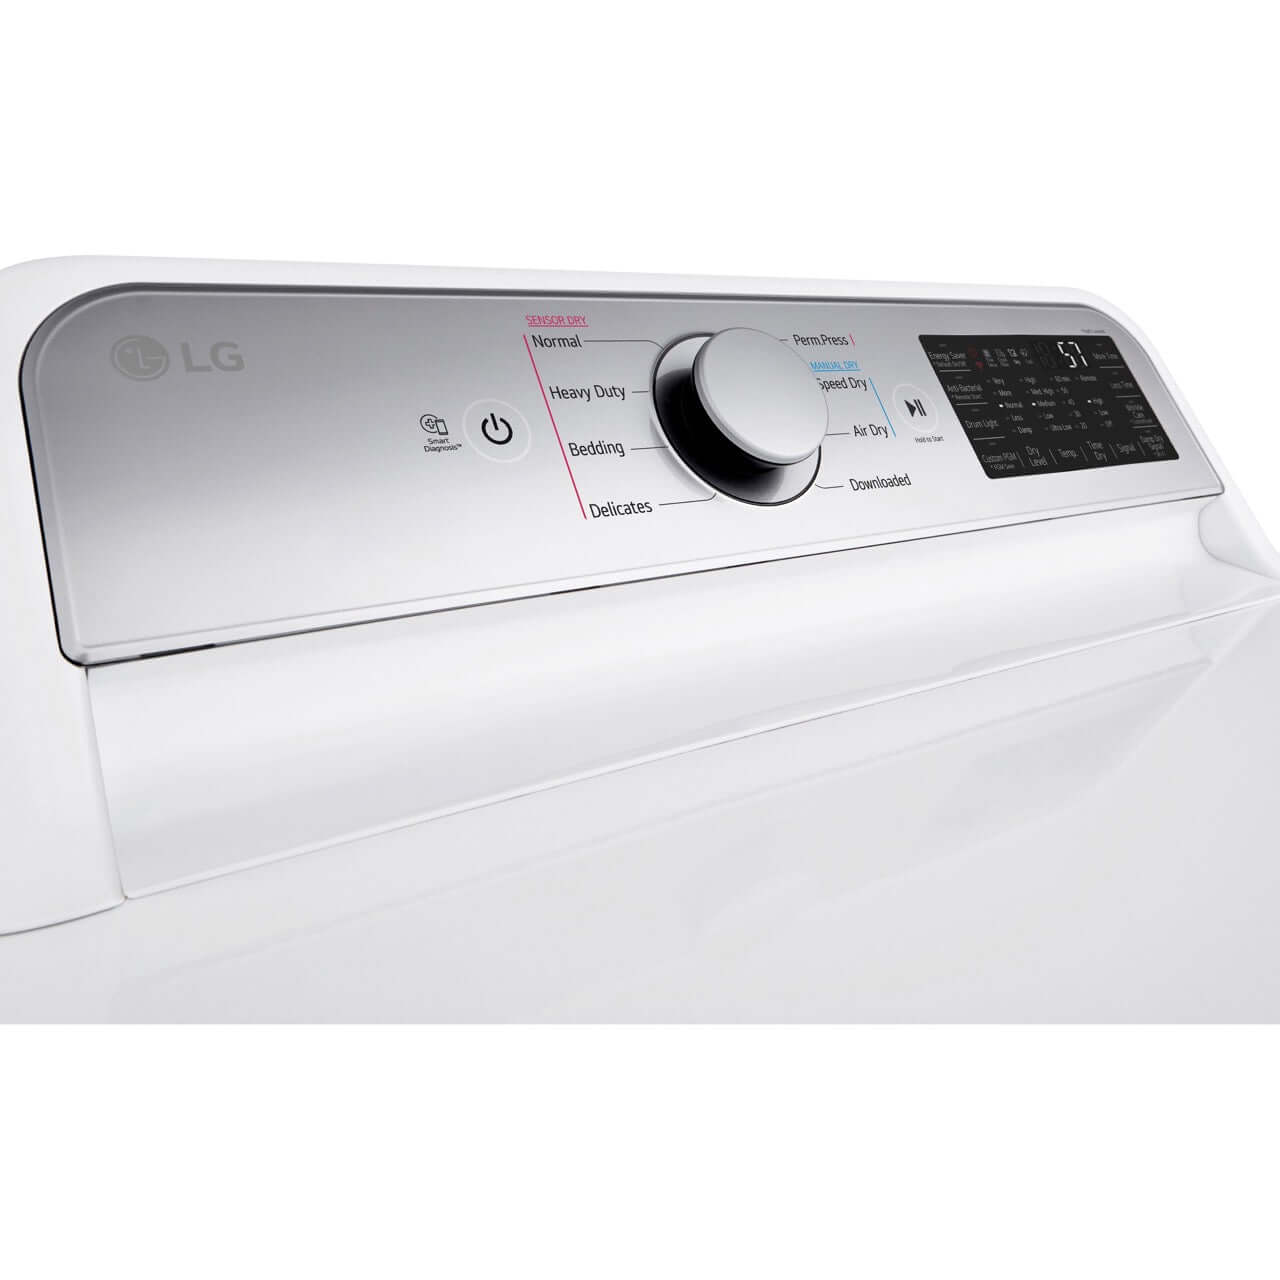 Dryer control panel with normal, heavy duty, bedding, delicates, permanent press, speed dry, air dry, and downloaded settings